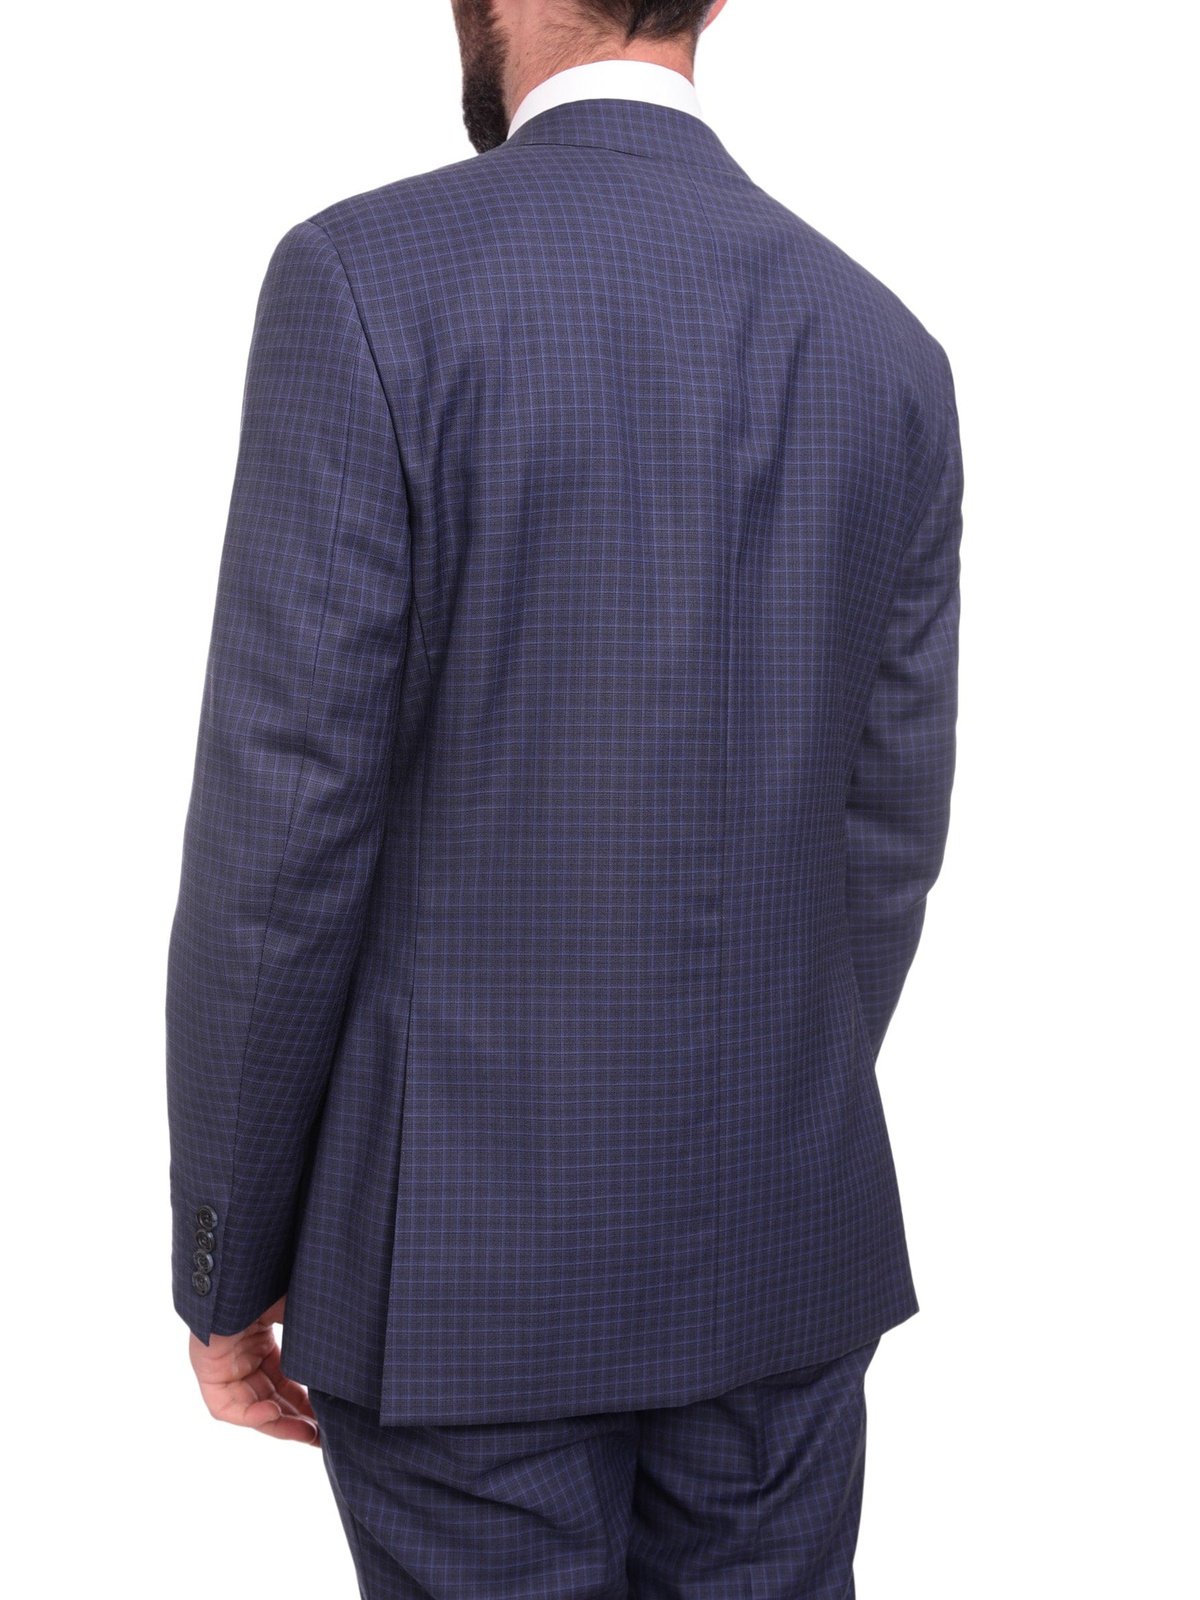 Napoli TWO PIECE SUITS Napoli Slim Fit Navy Blue Check Two Button Half Canvassed Super 150s Wool Suit